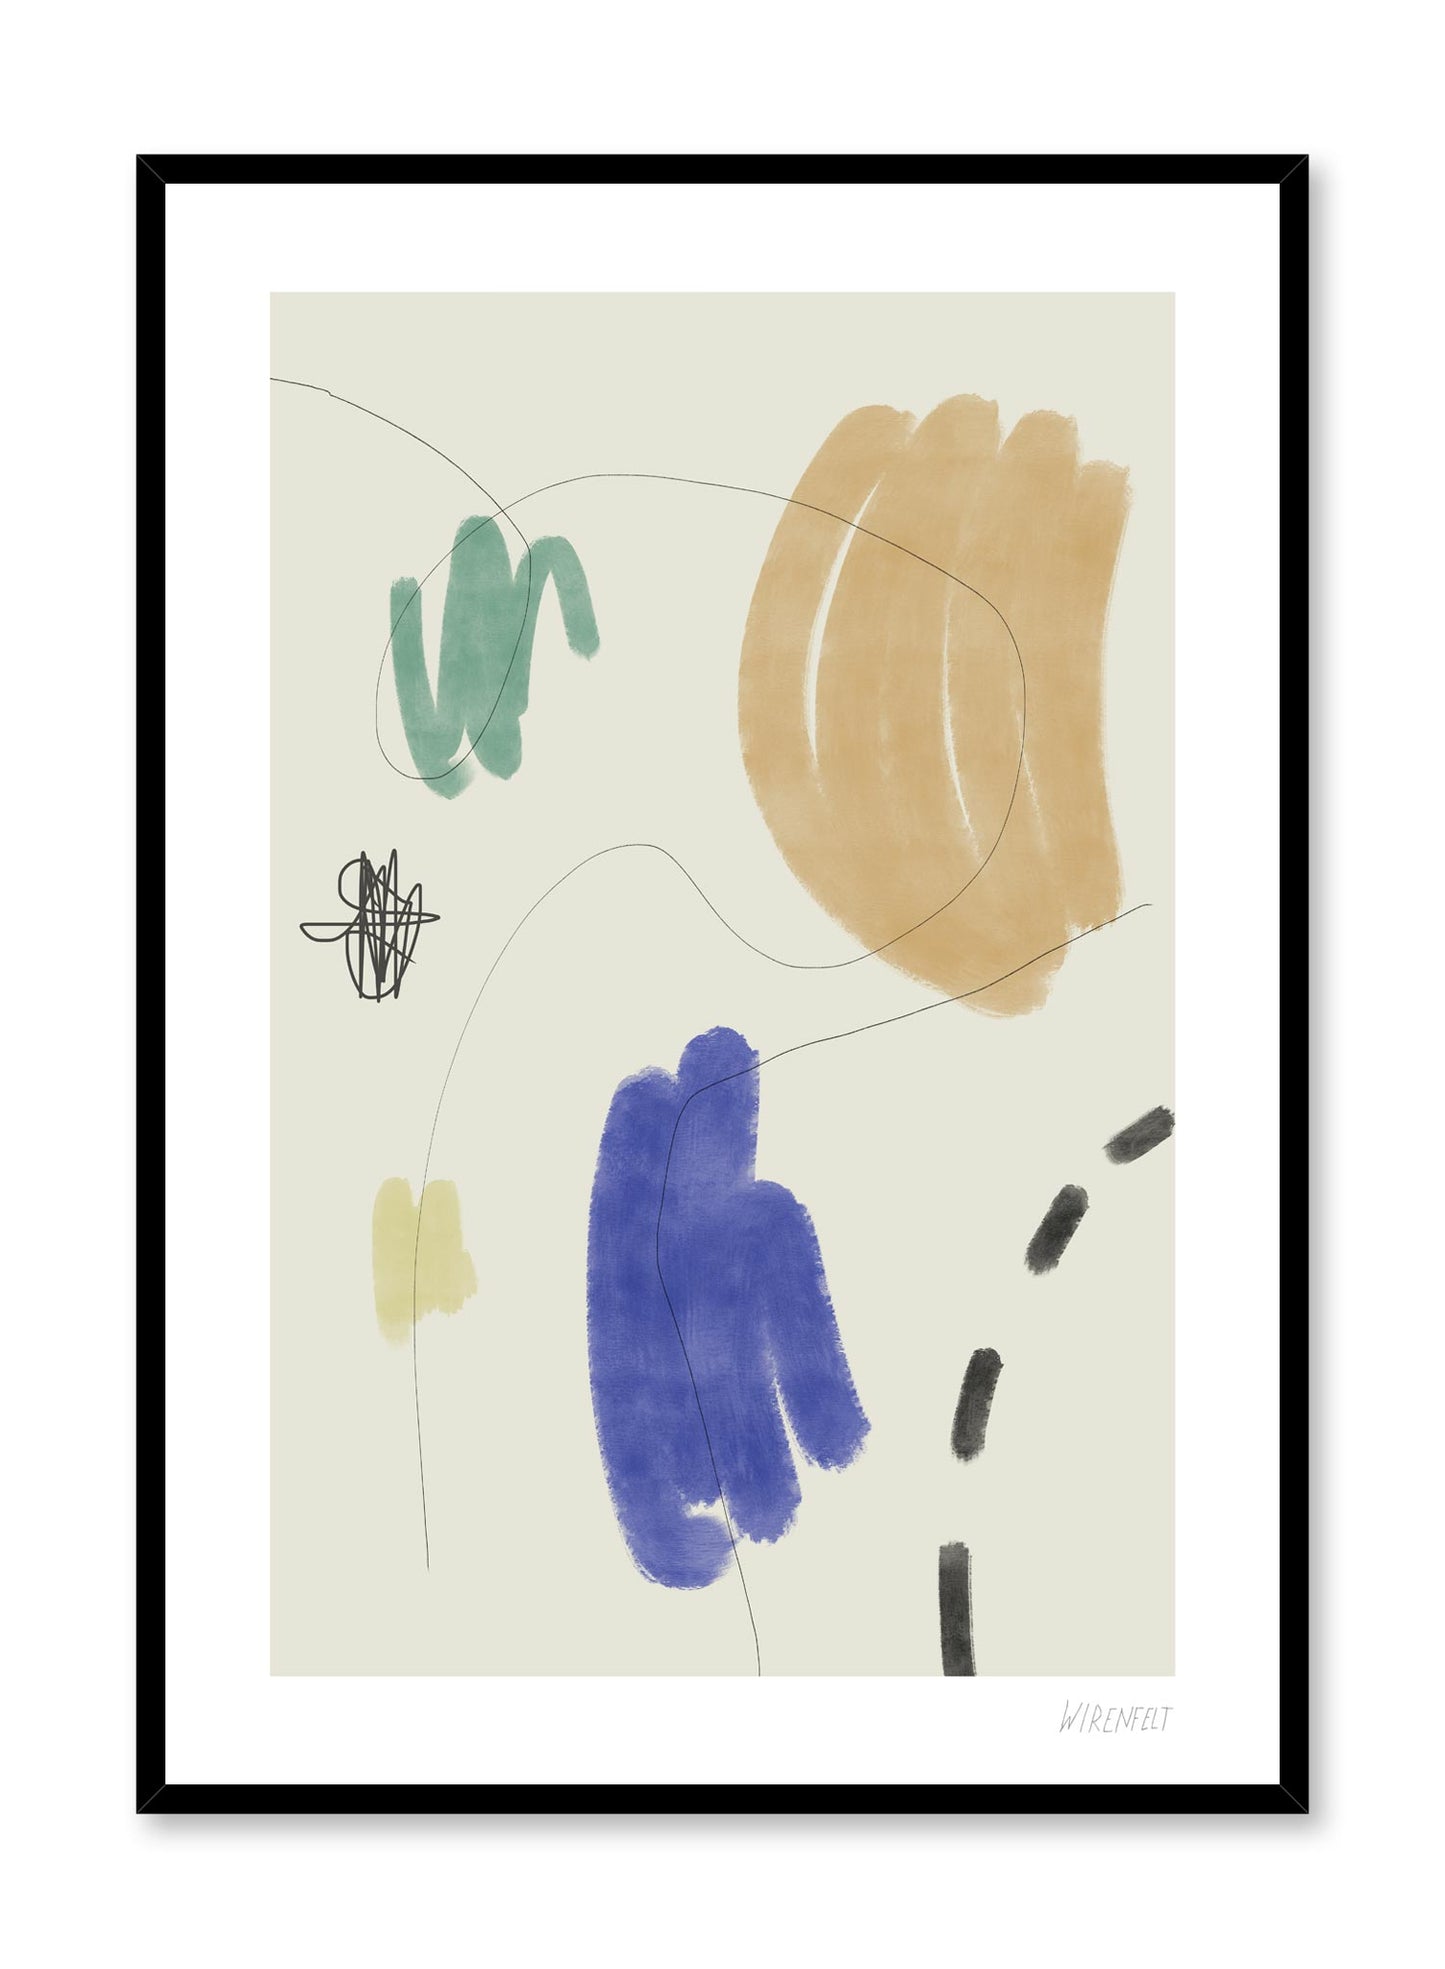 Minimalist abstract art design entitled Bingo by Lisa Wirenfelt of Youthful Scribbles - find at Opposite Wall